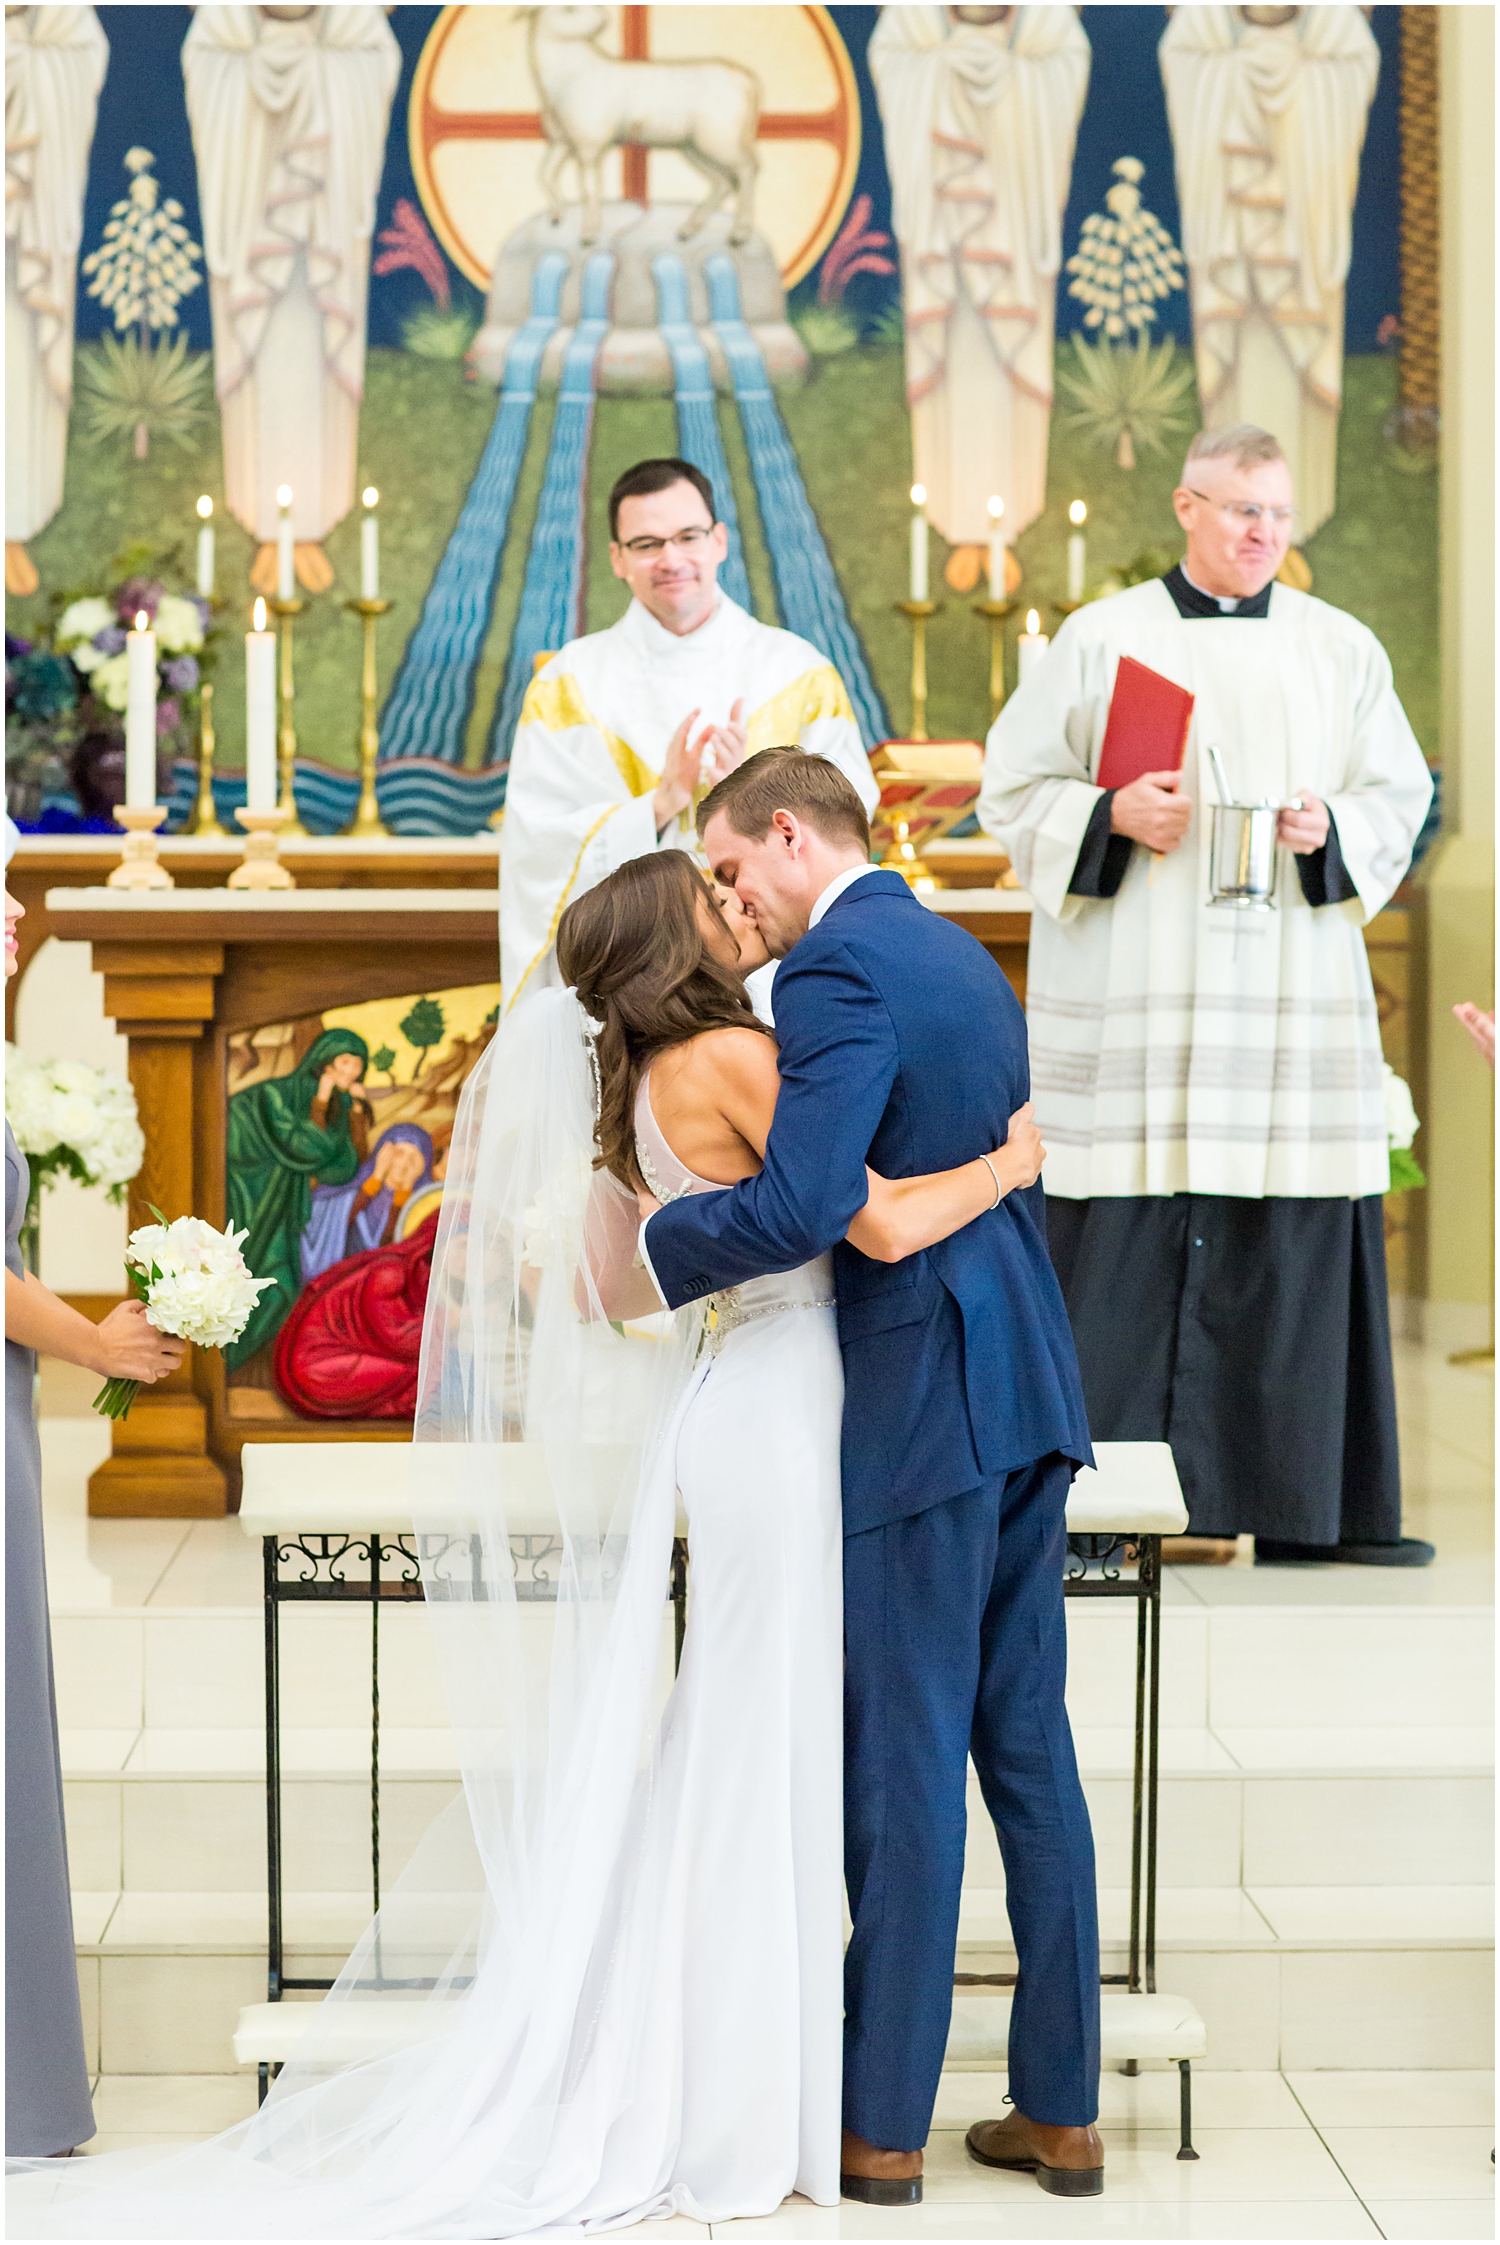 bride in demetrios bridal gown racerback with sheer beading with white hydrangeas bouquet with groom in navy blue suit with light blue tie in church first kiss on wedding day